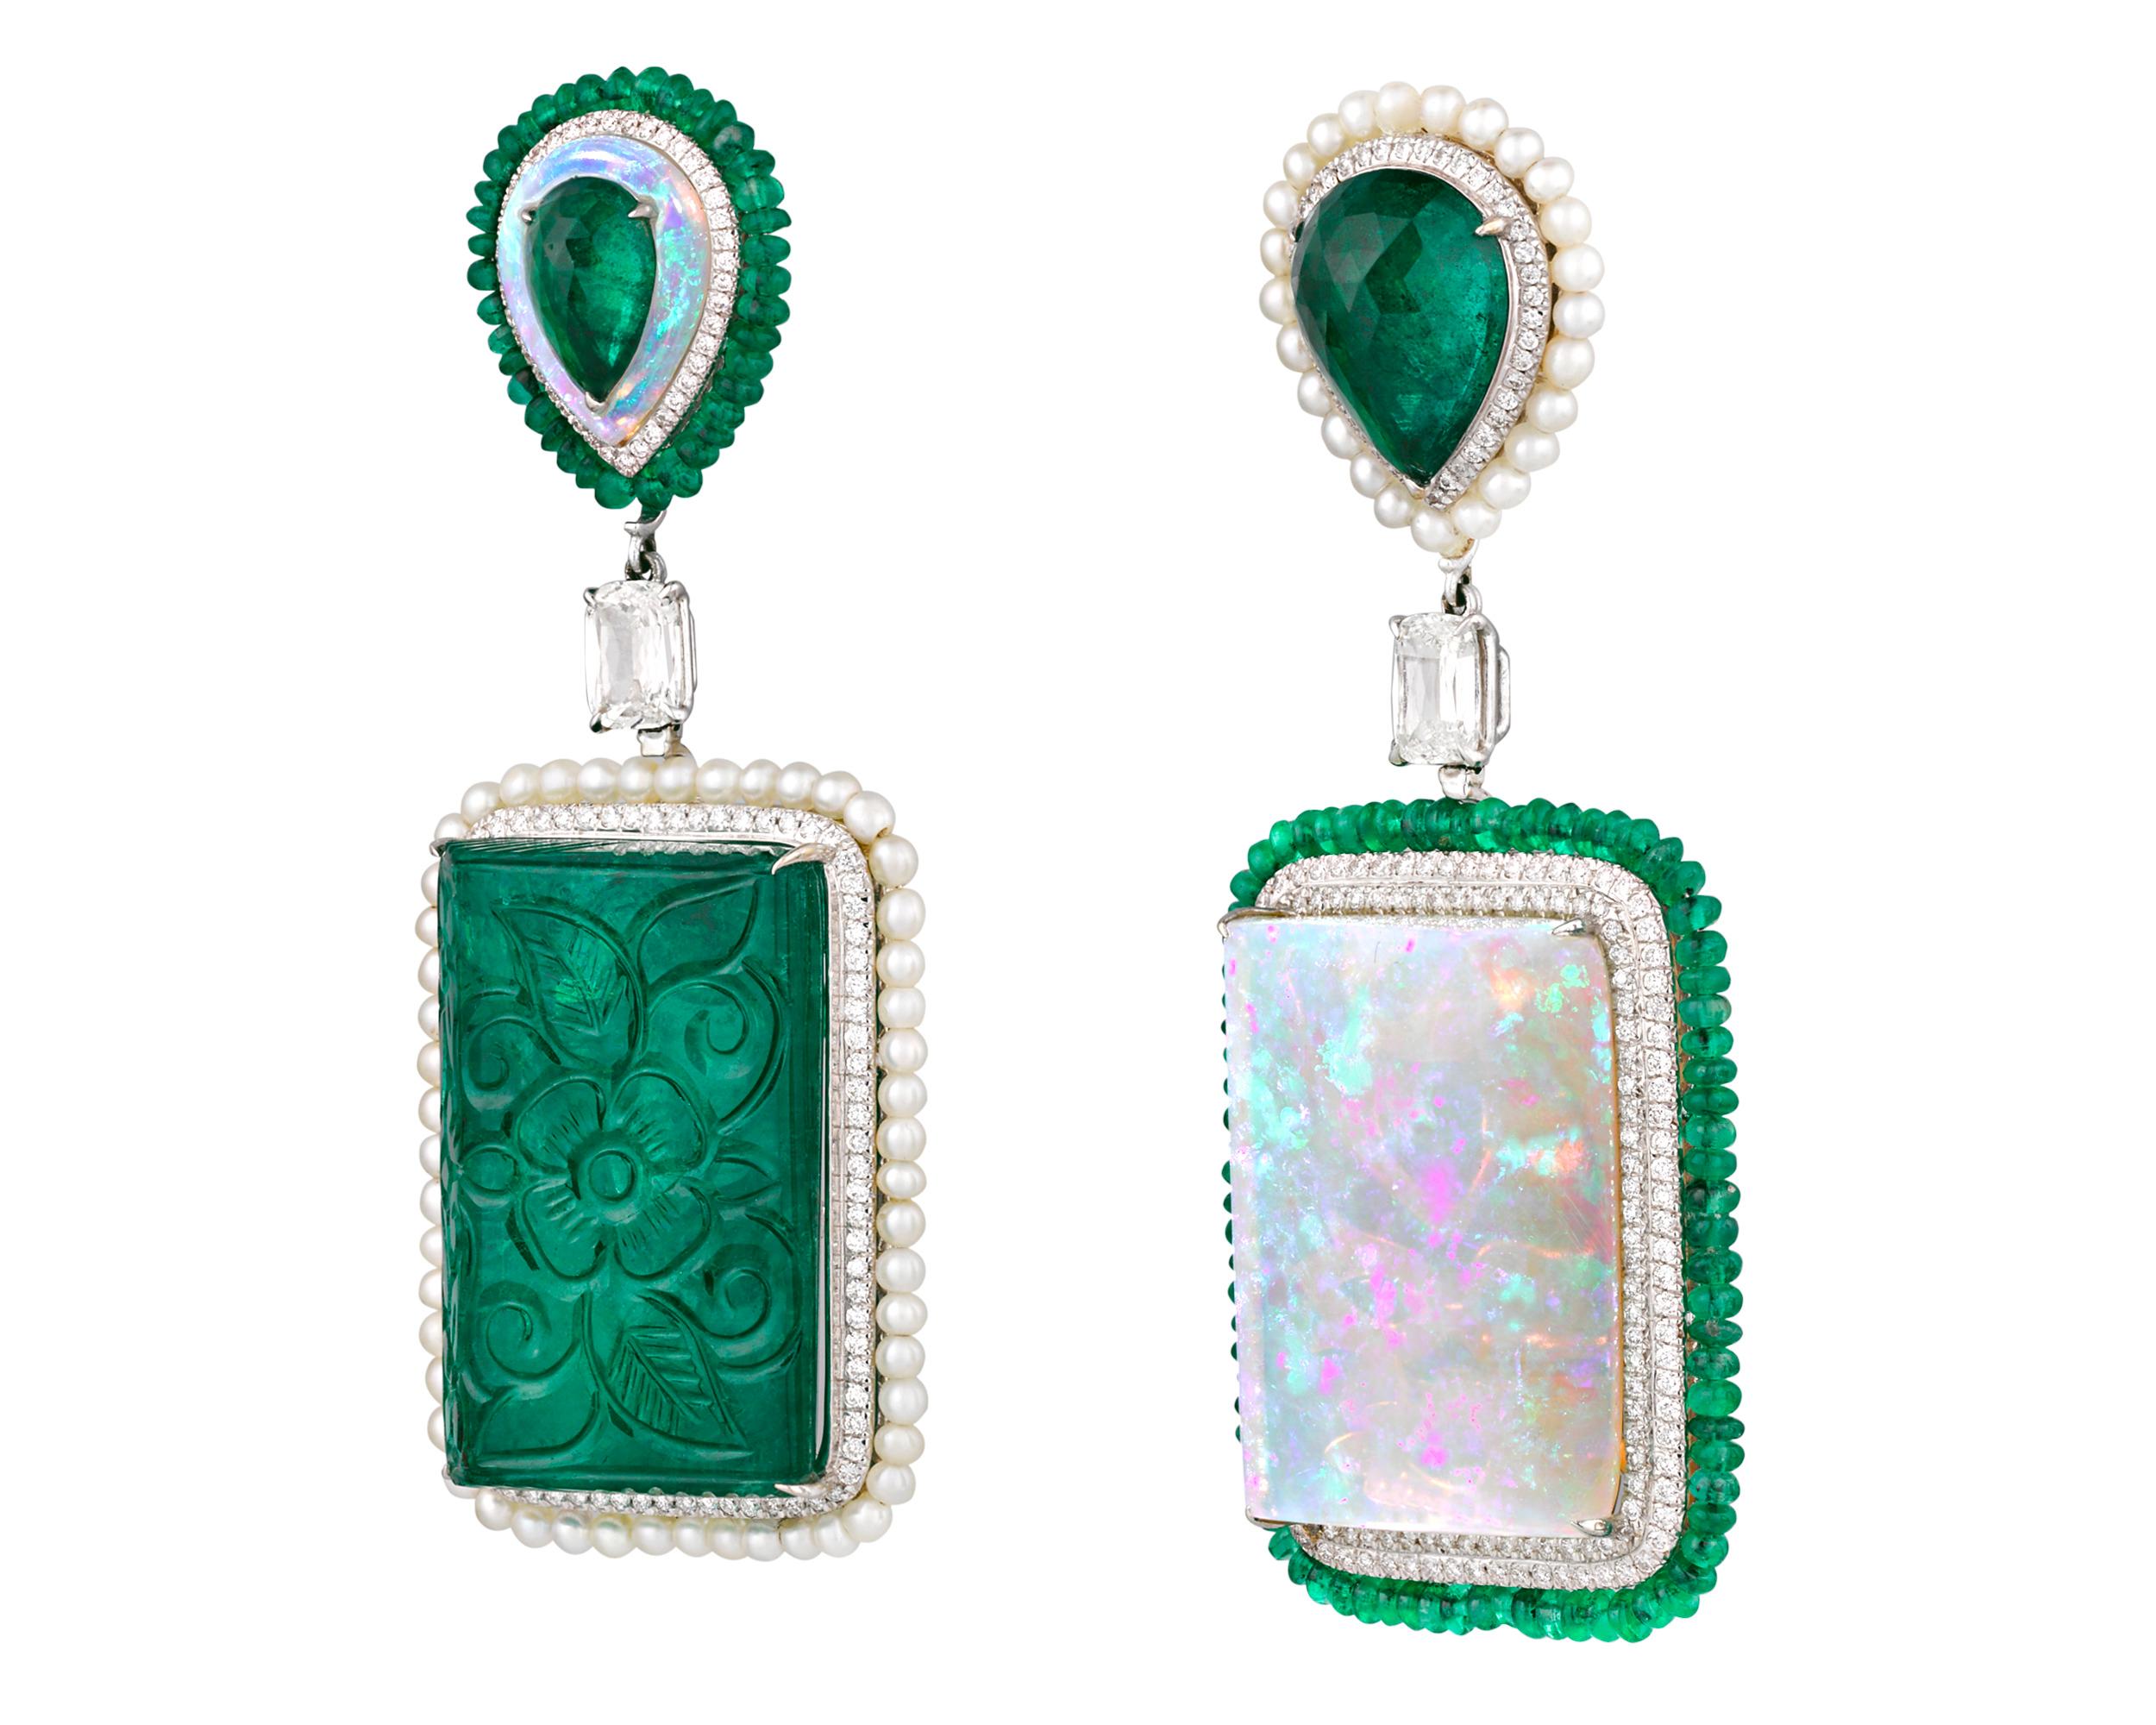 Exquisite emeralds and striking opals combine to stunning effect in these playful, asymmetric earrings. One earring features a monumental 64.44-carat emerald, intricately carved with a floral motif, while the other features a fiery 38.13-carat white